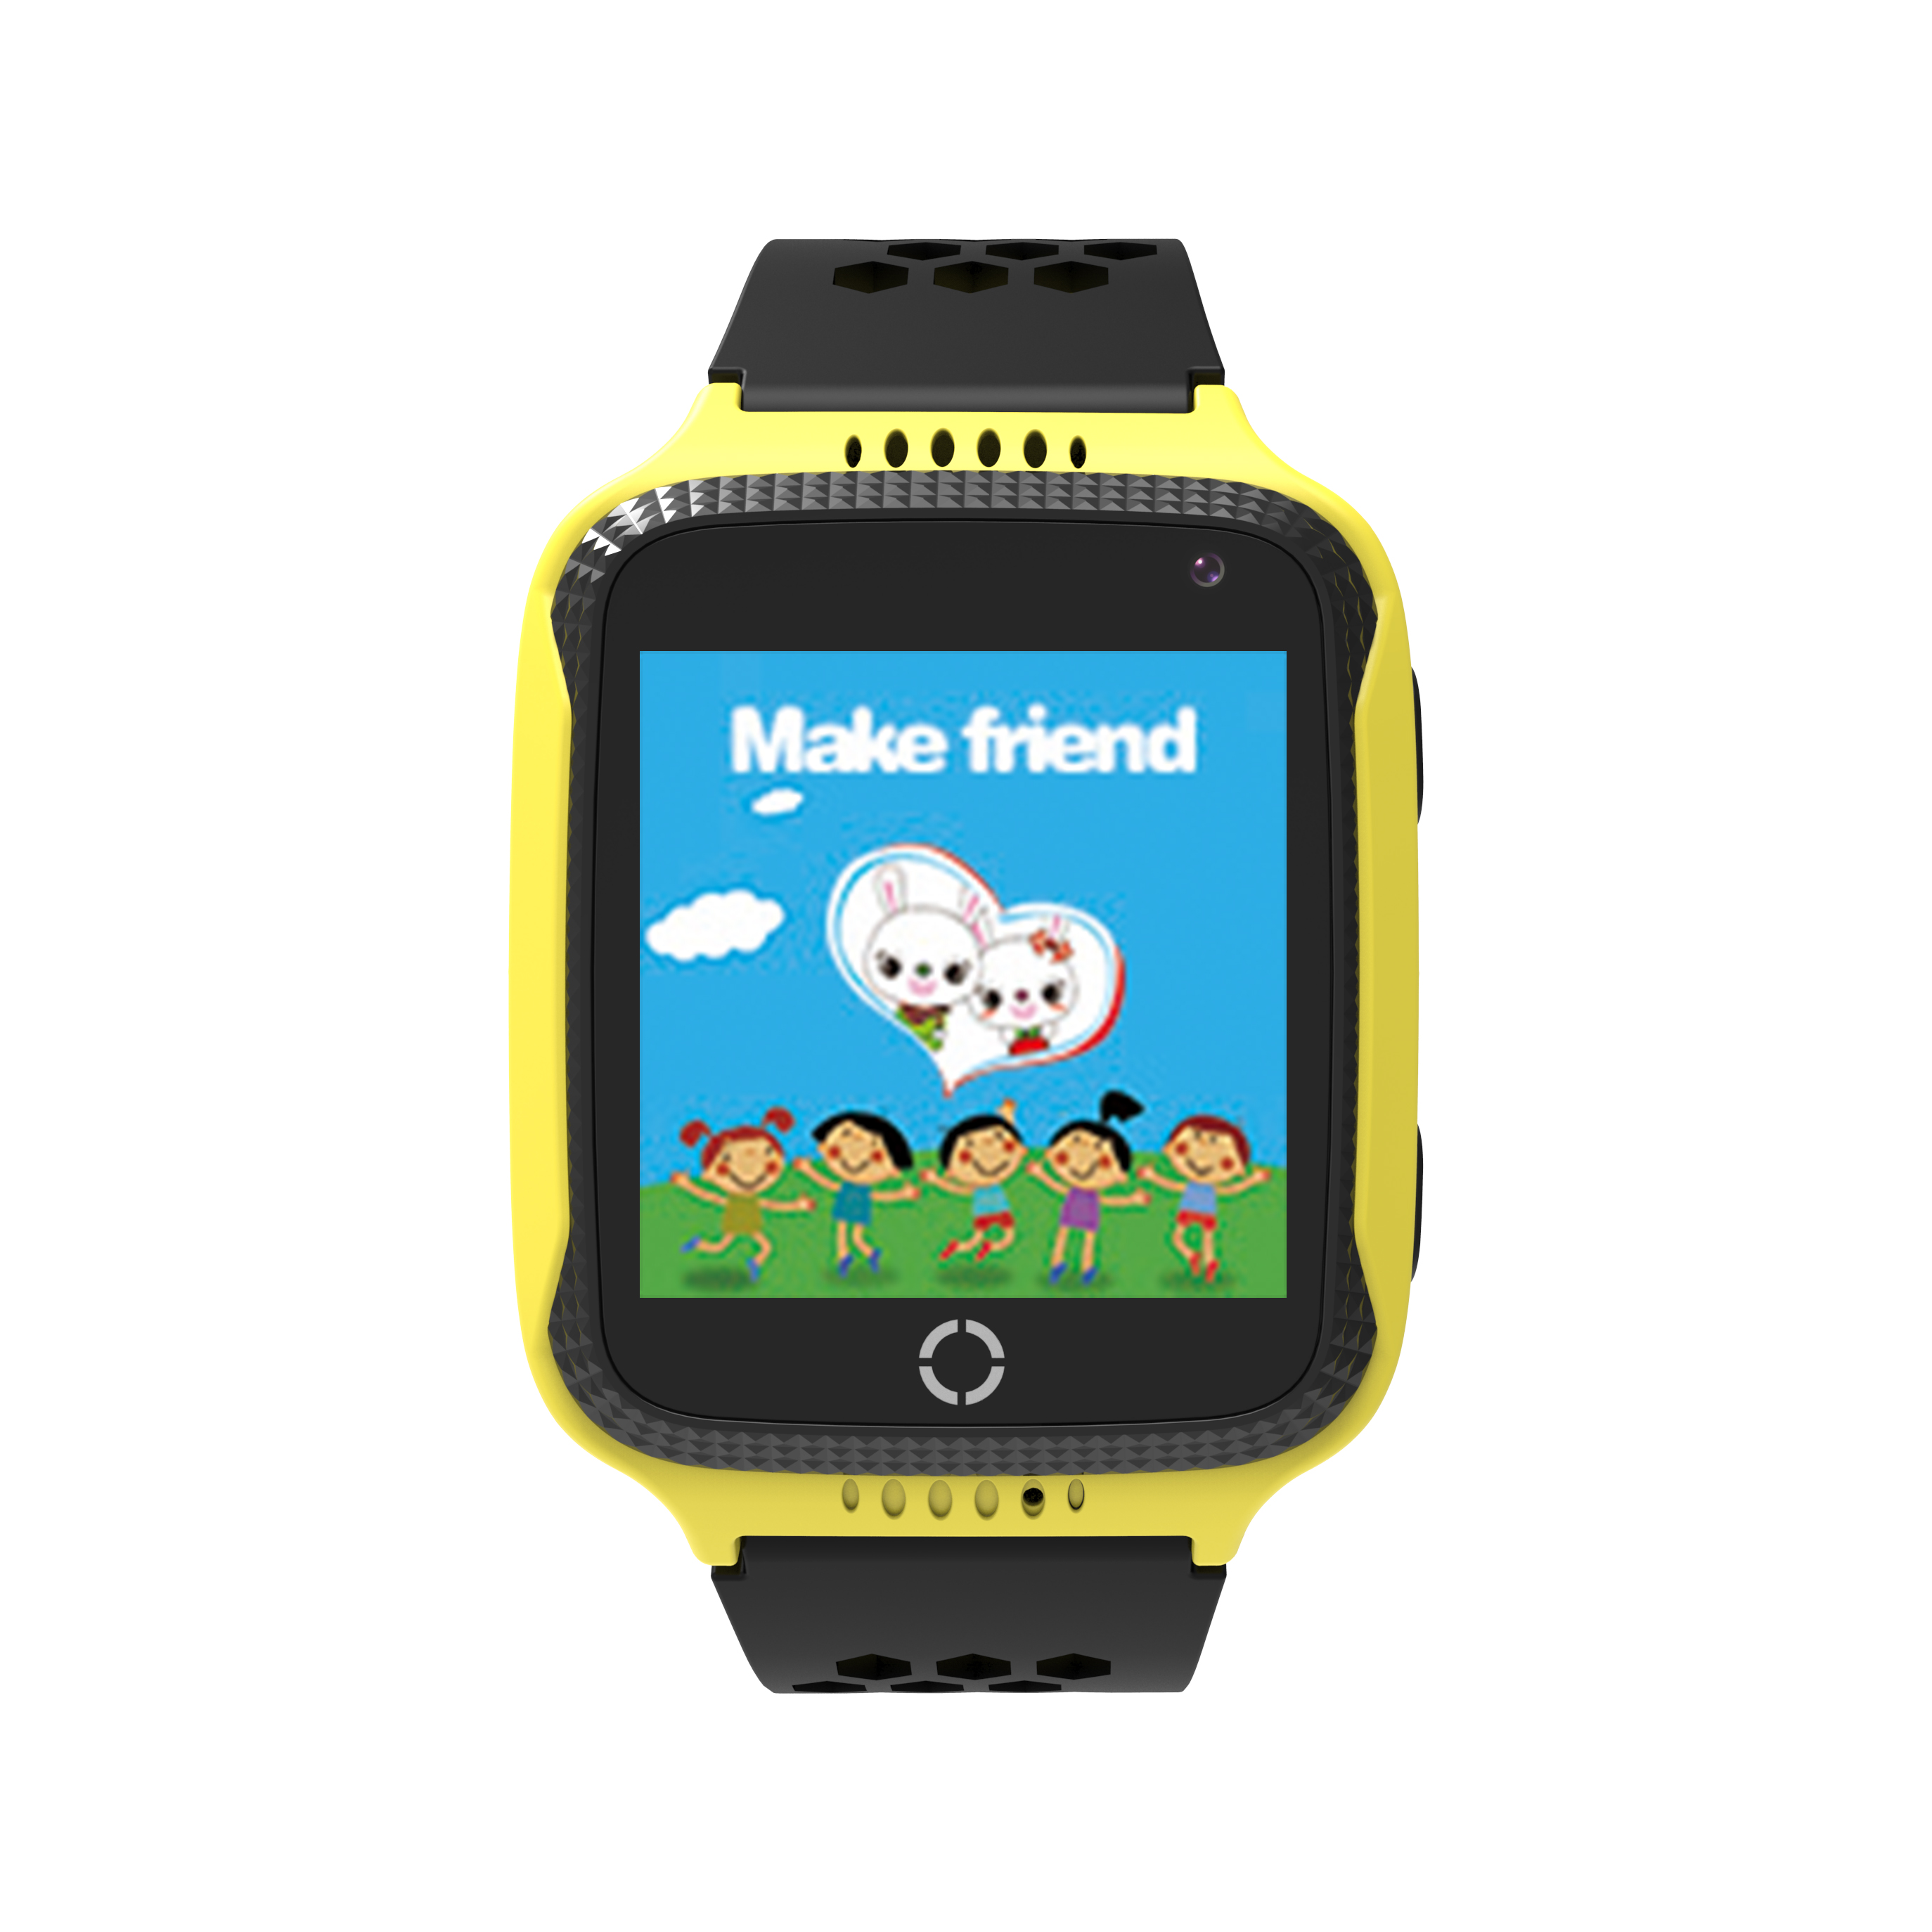 China factory hot selling safety security Kids Children GPS Tracker watch with Camera and Torch light (D26)